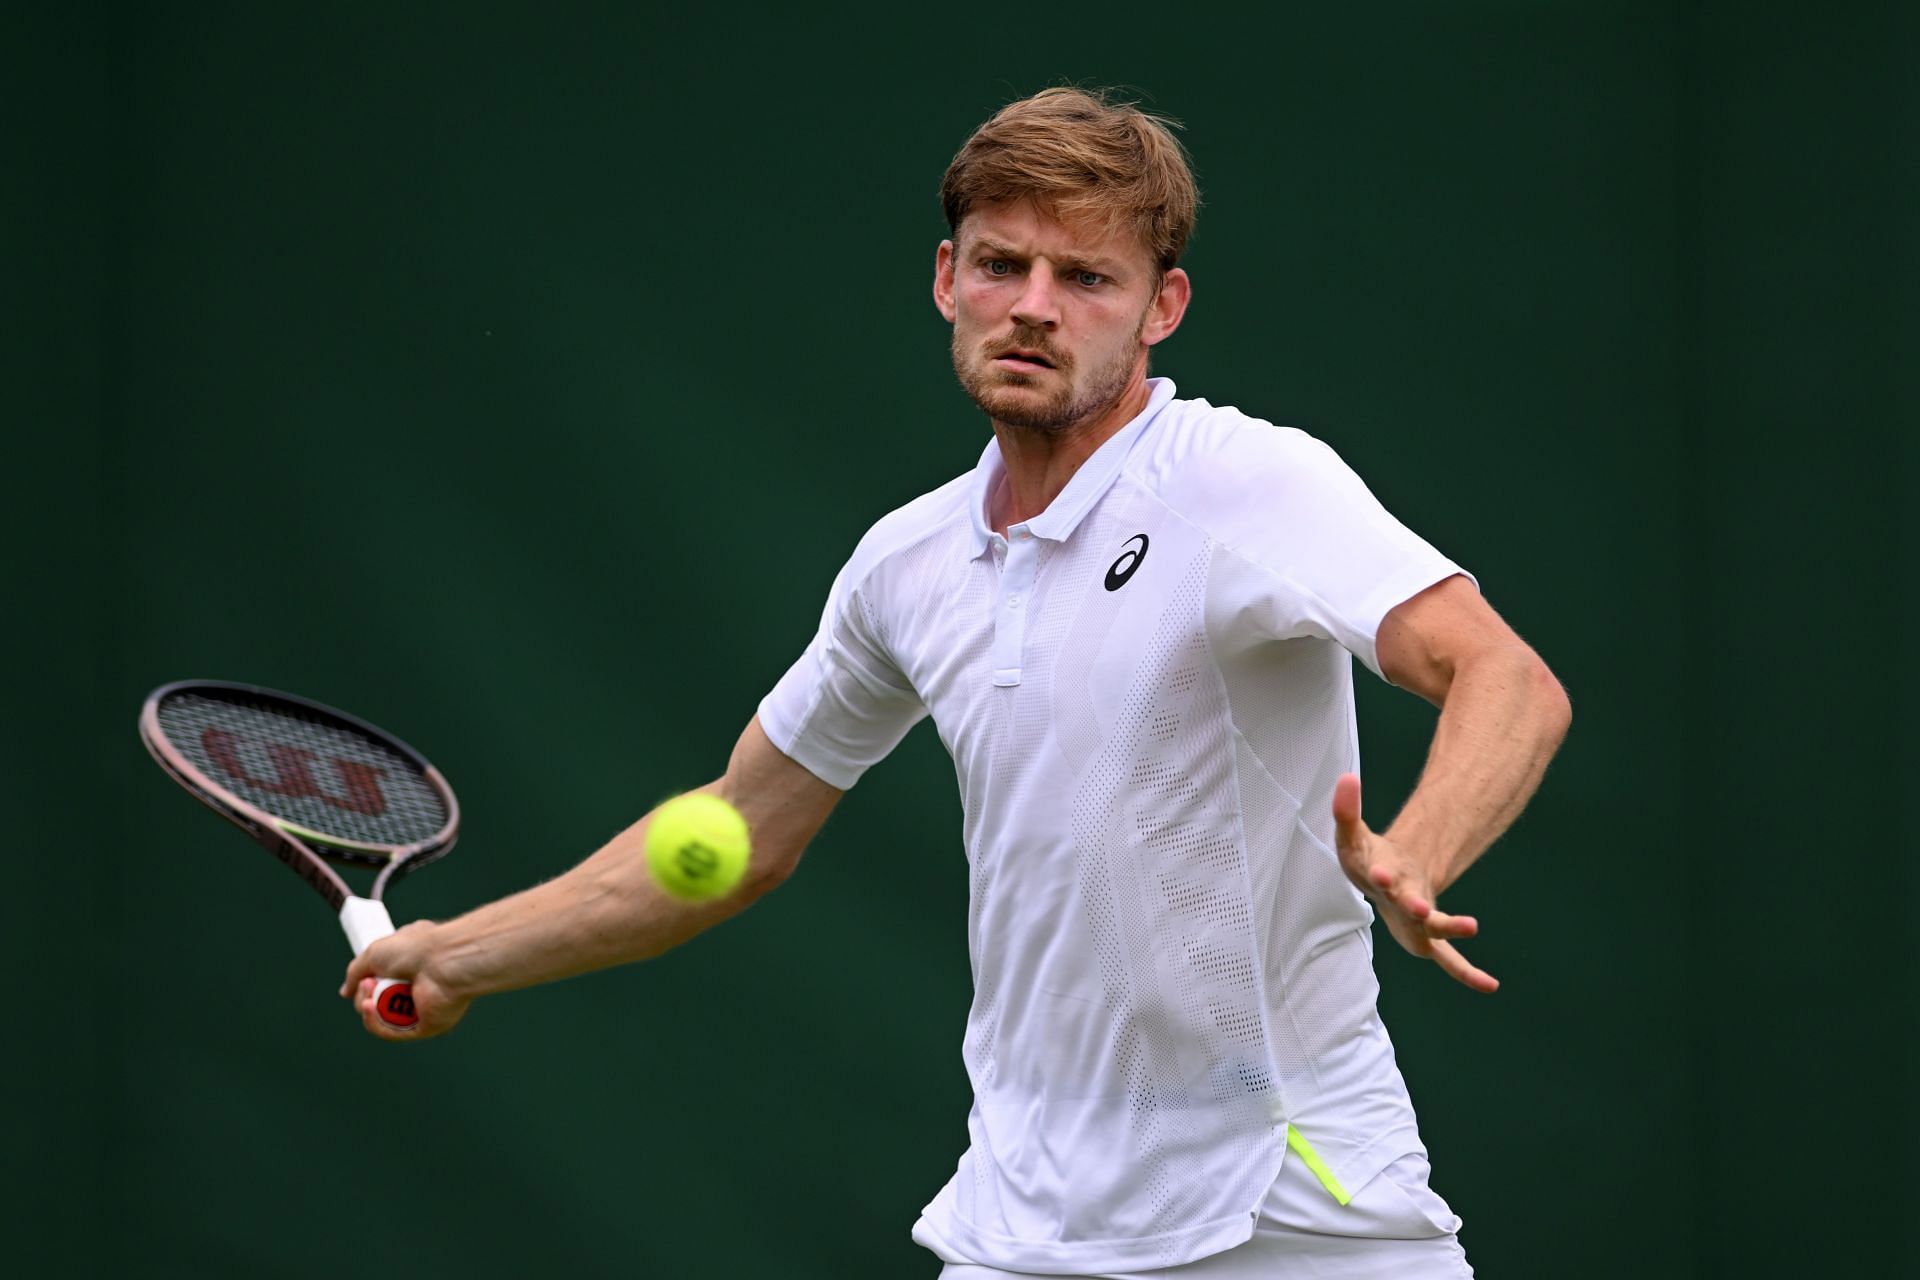 David Goffin will look to book his place in the last 16 of Wimbledon